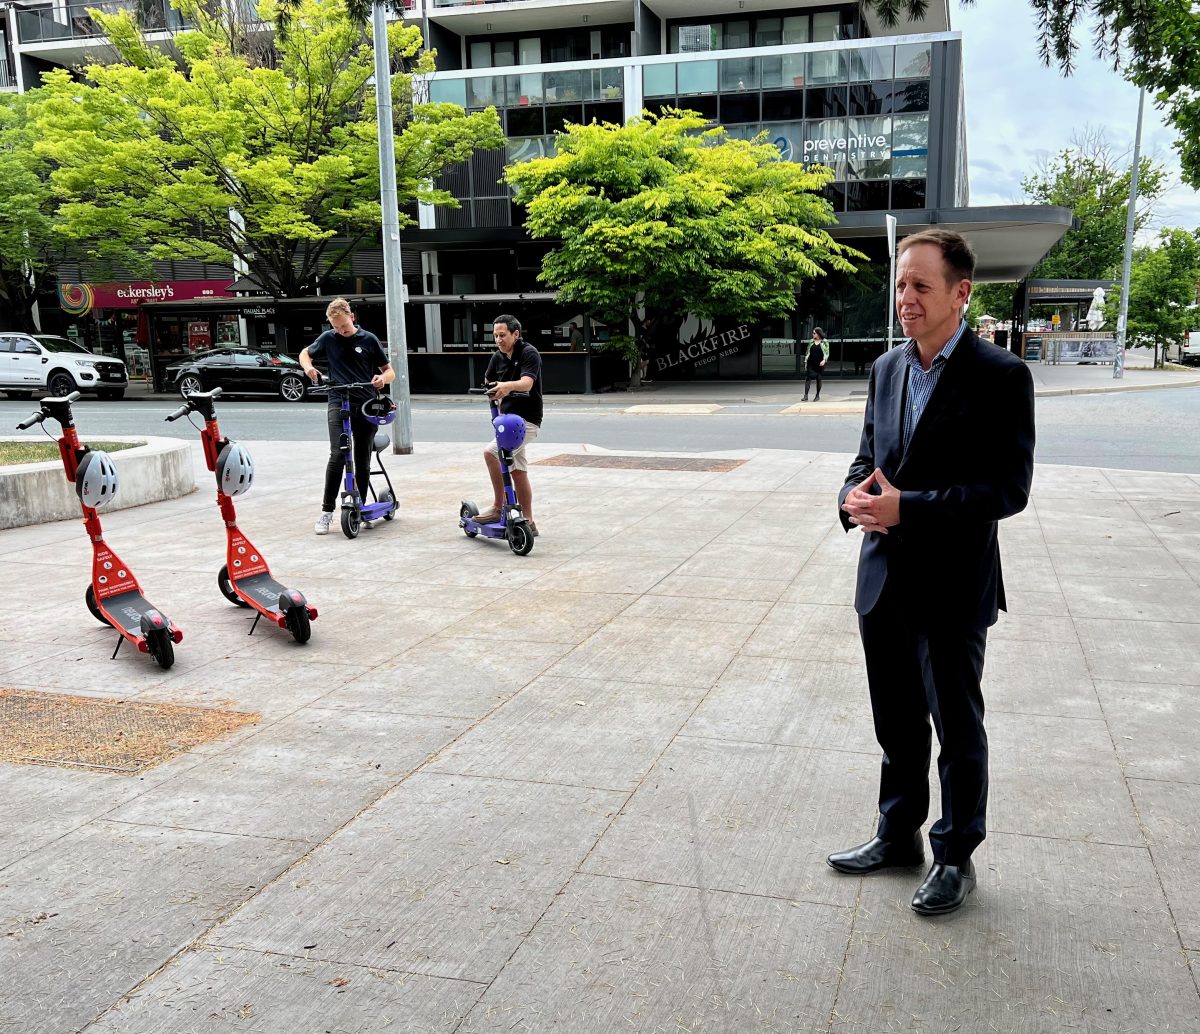 Shane Rattenbury stands in front of electric scooters